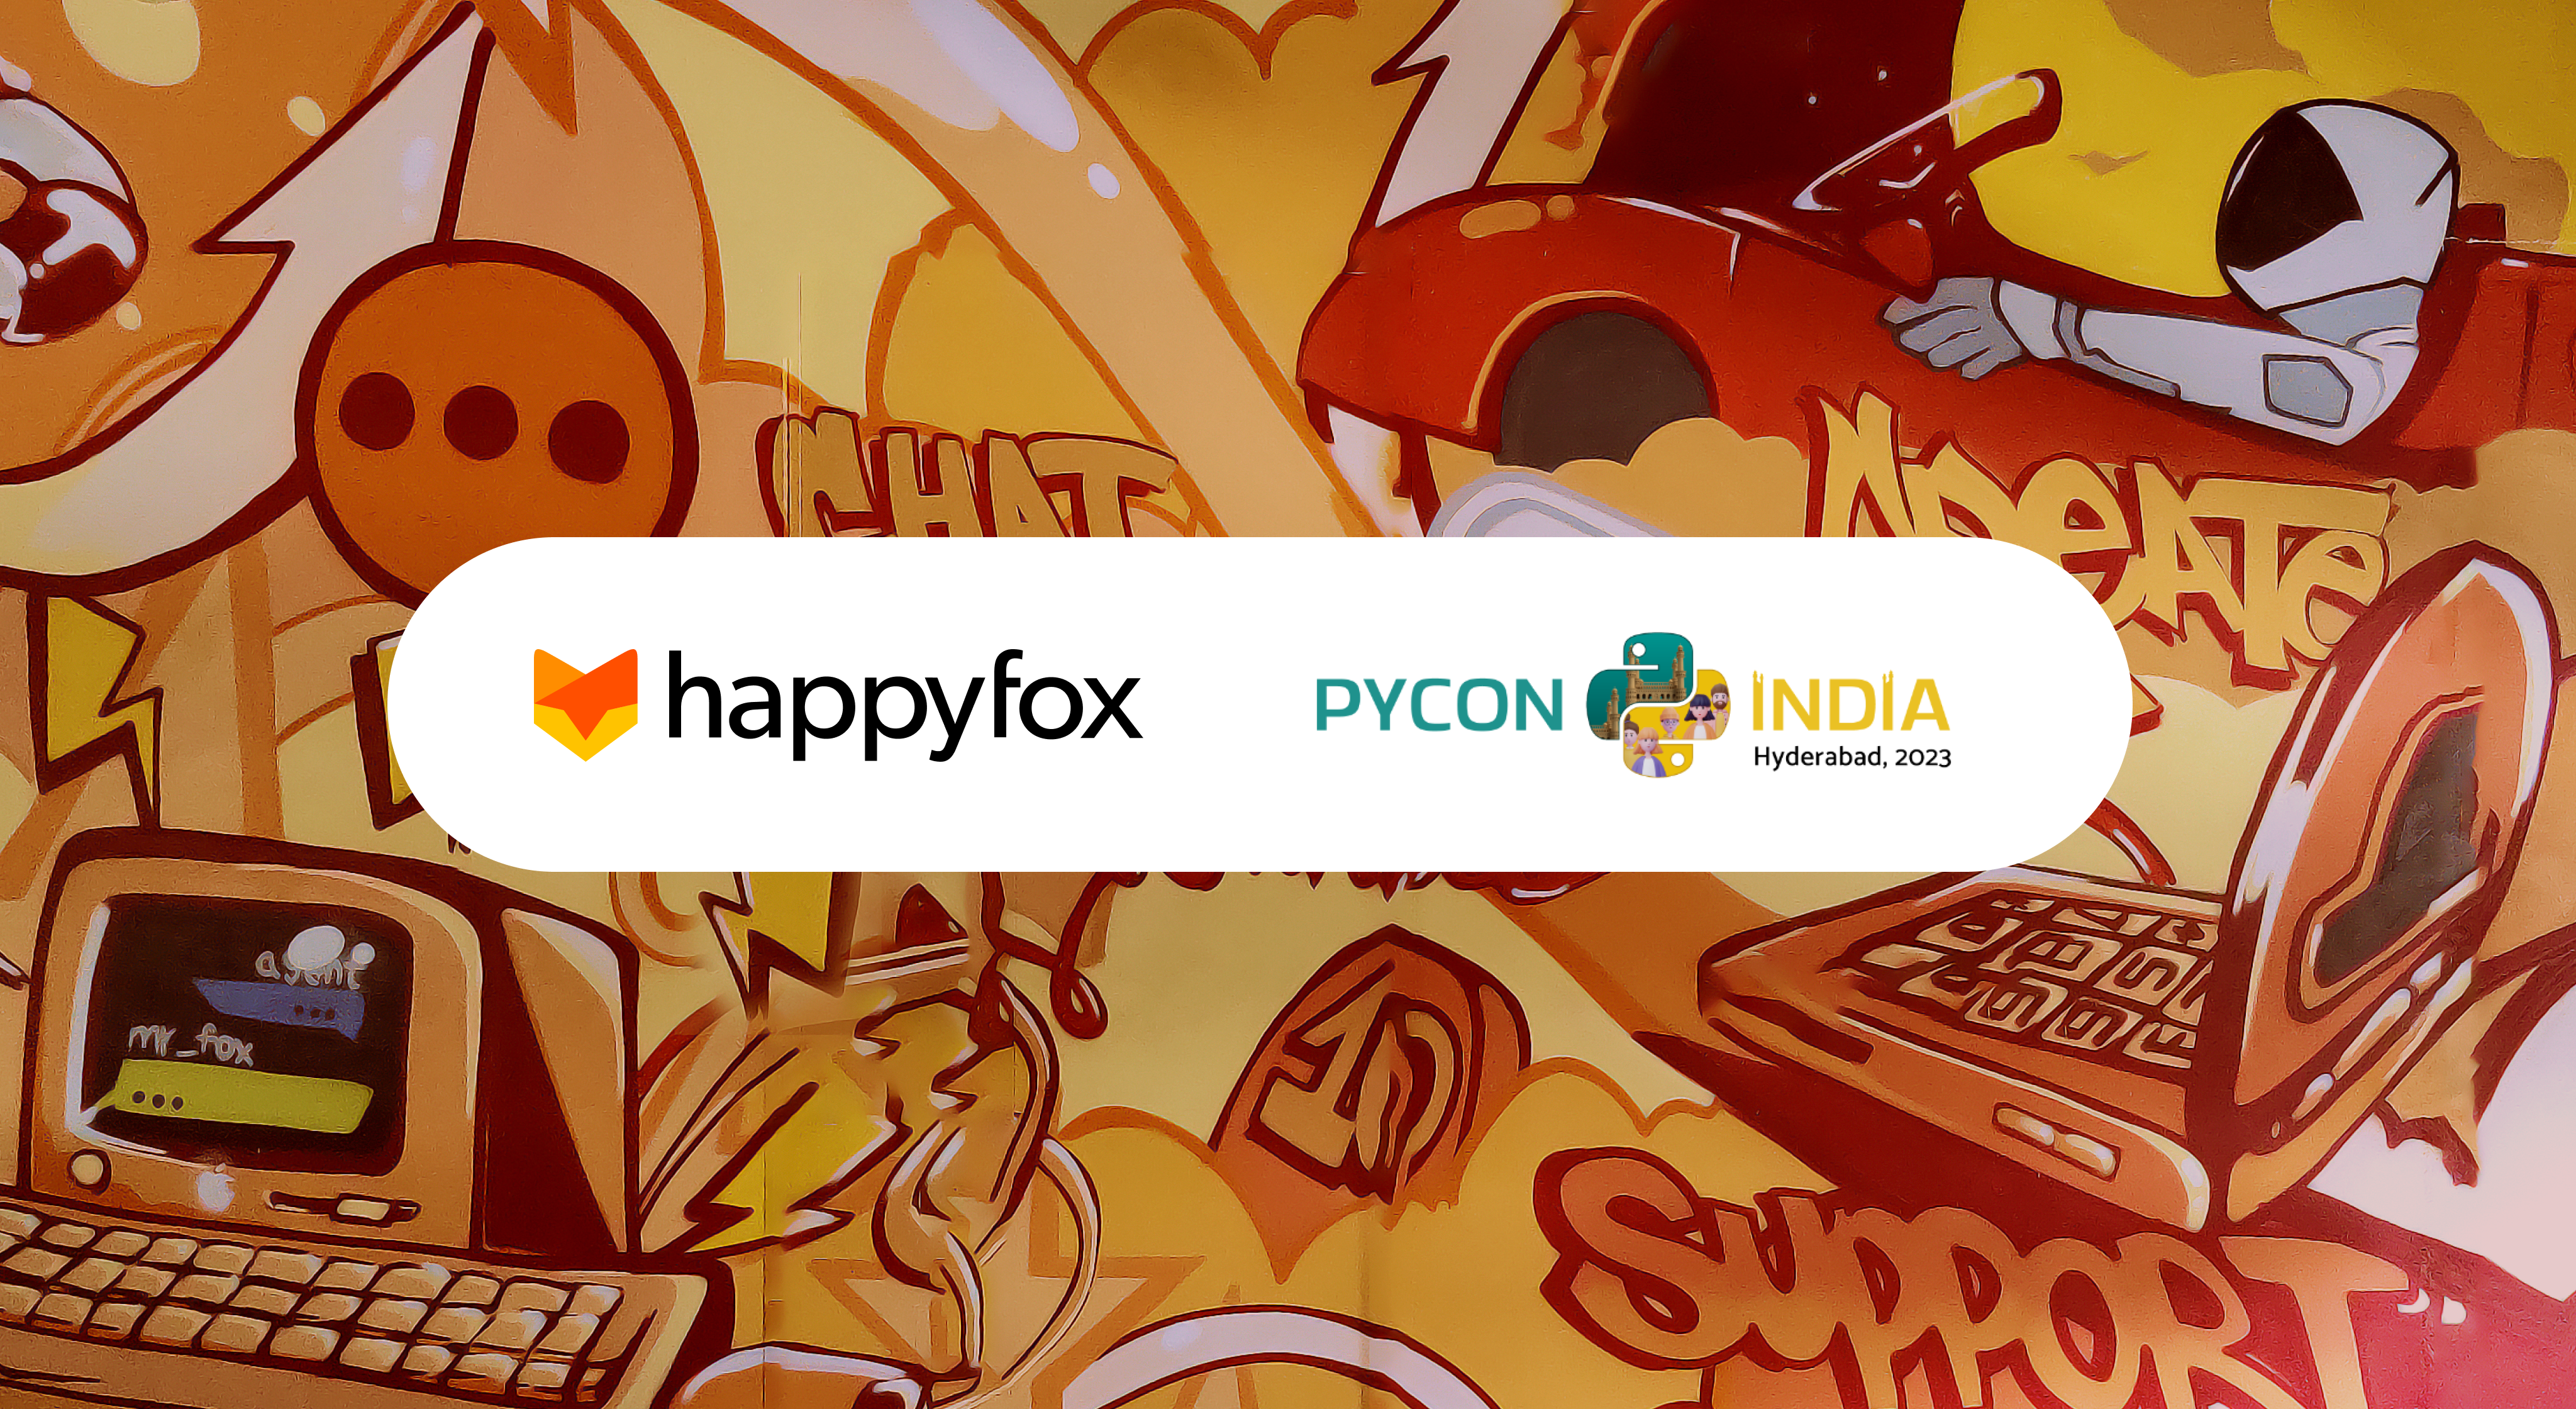 HappyFox sets the stage for Python Innovation at PyCon India 2023